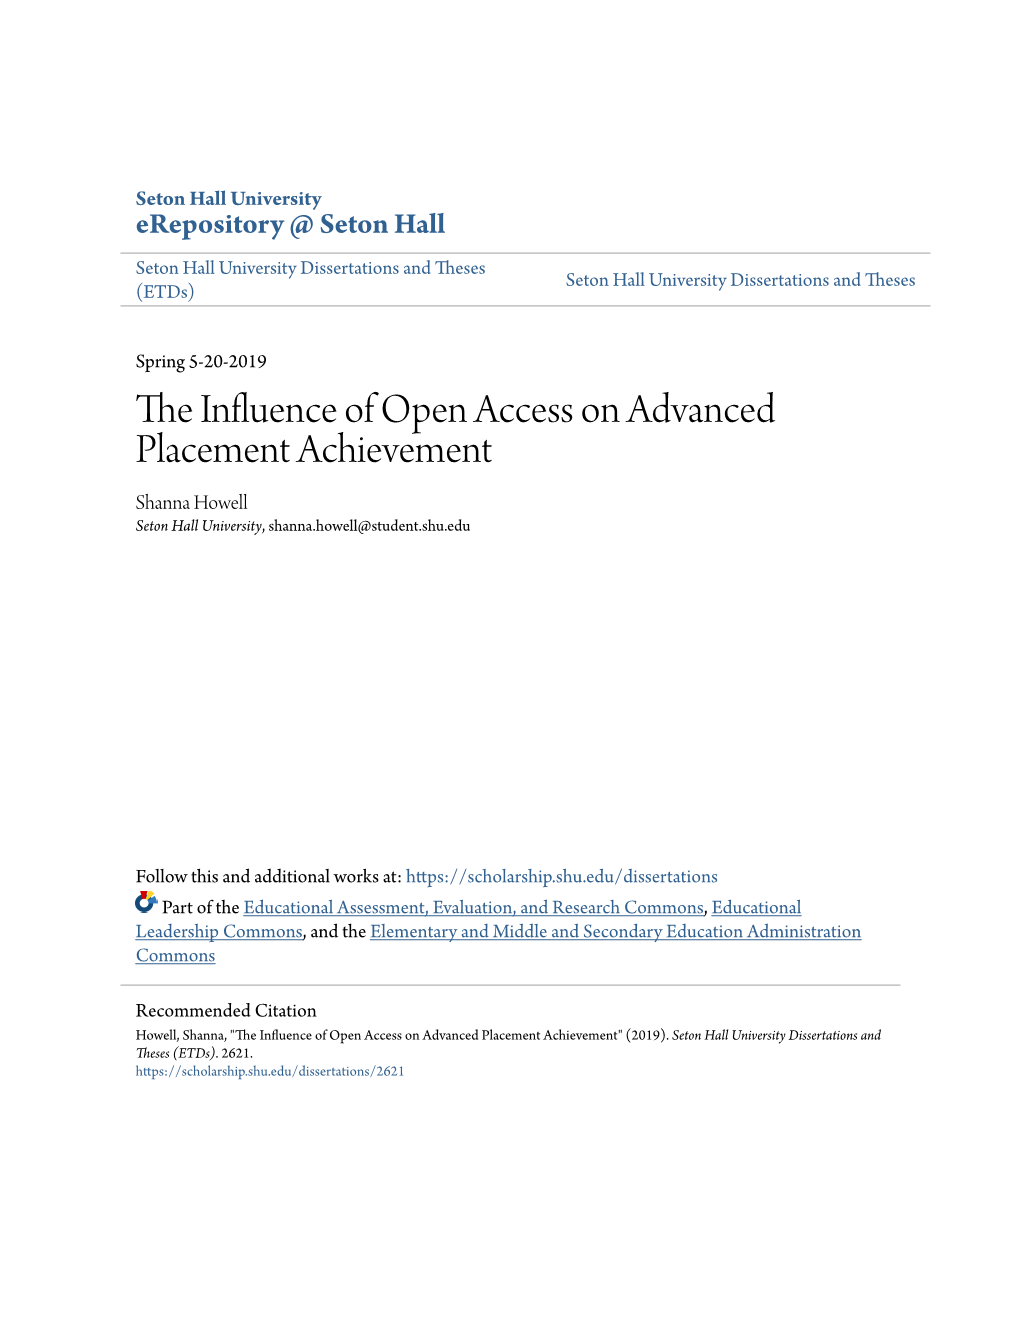 The Influence of Open Access on Advanced Placement Achievement